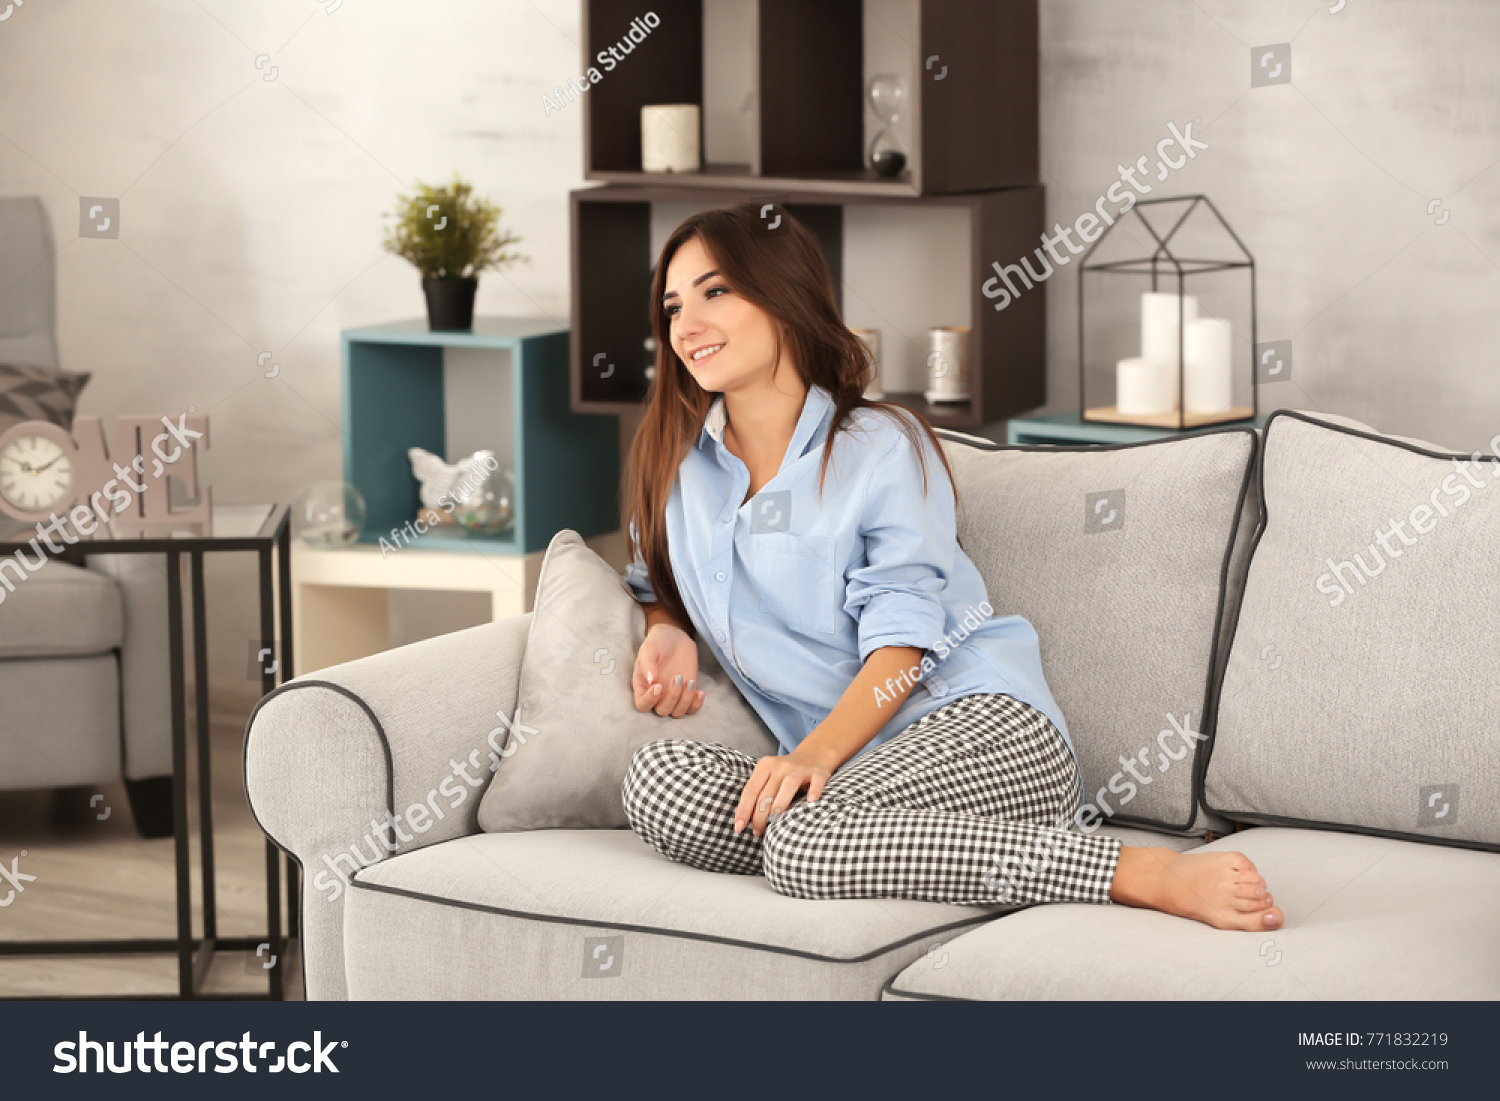 Young woman relaxing on sofa at home #771832219